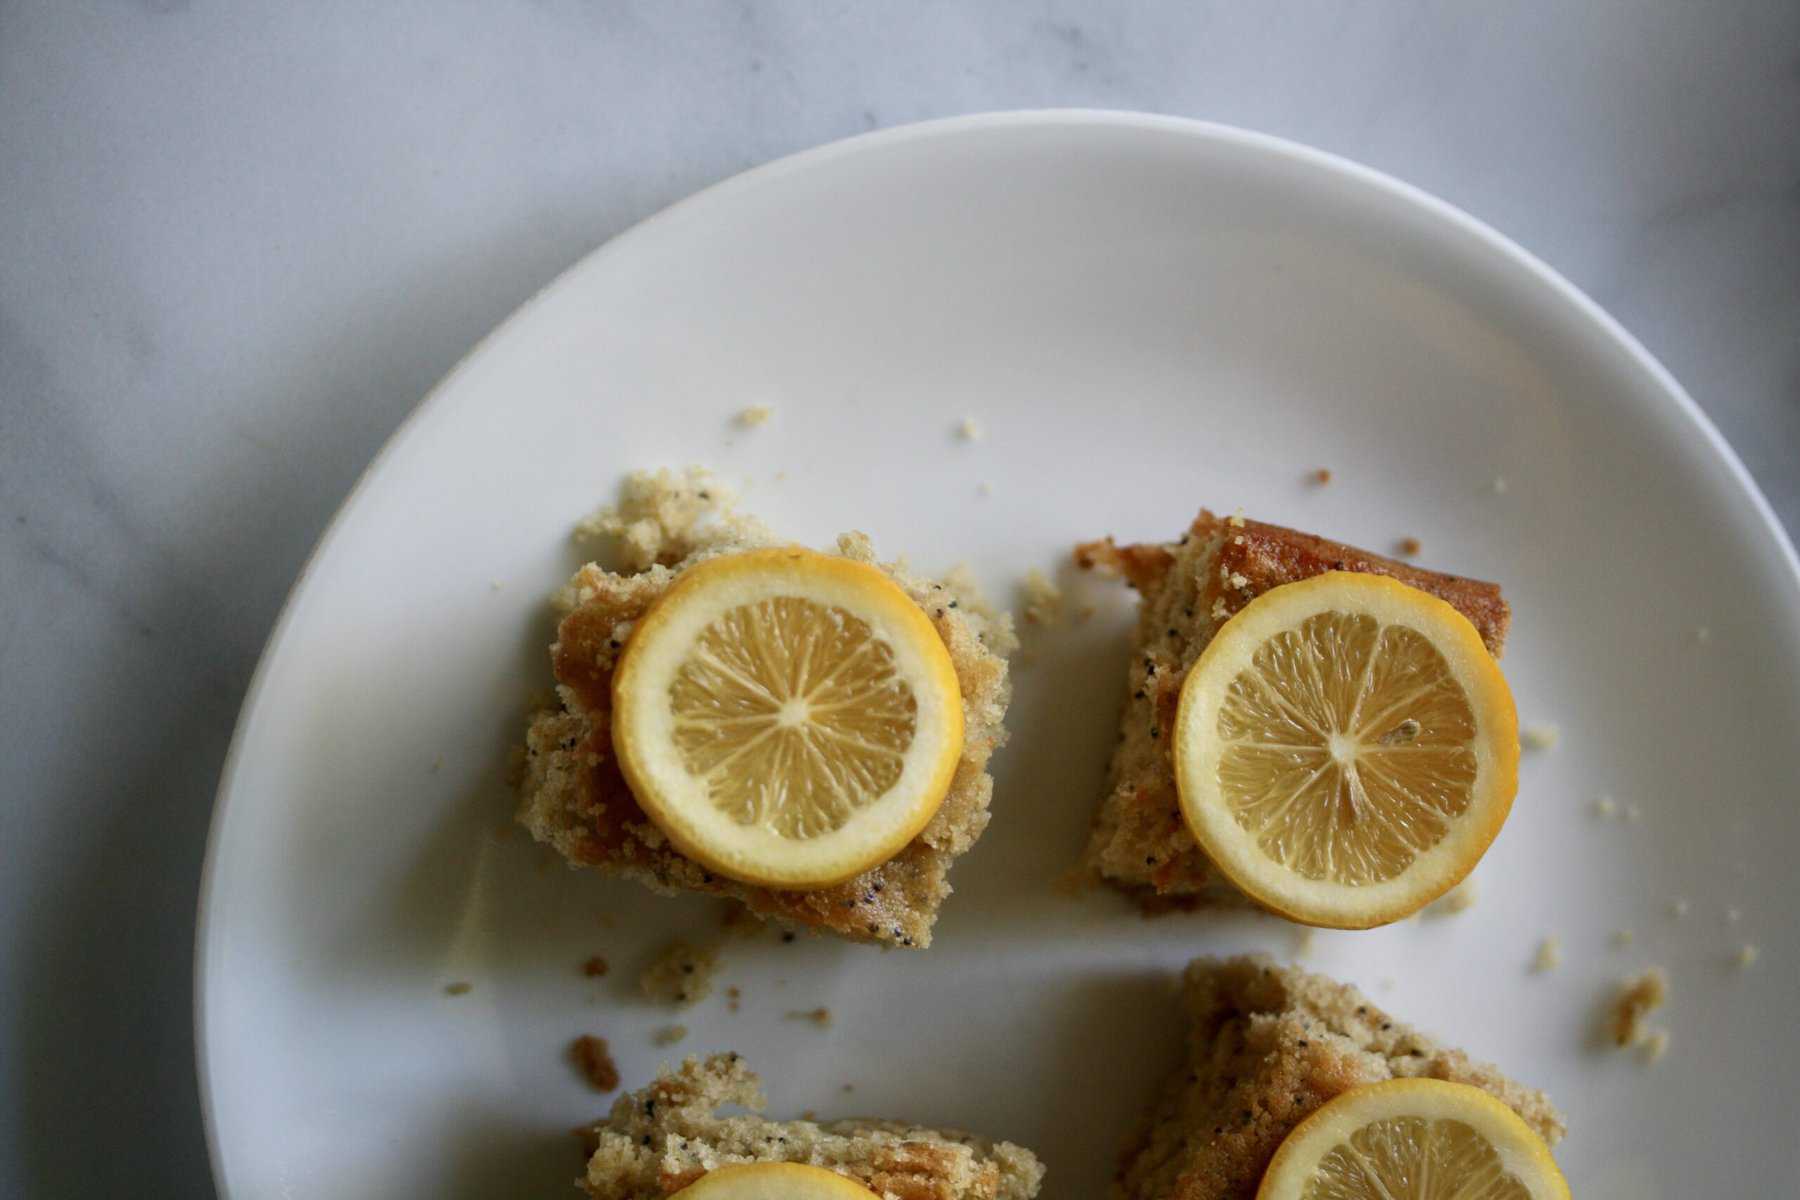 Lemon cake slices are topped with lemon.